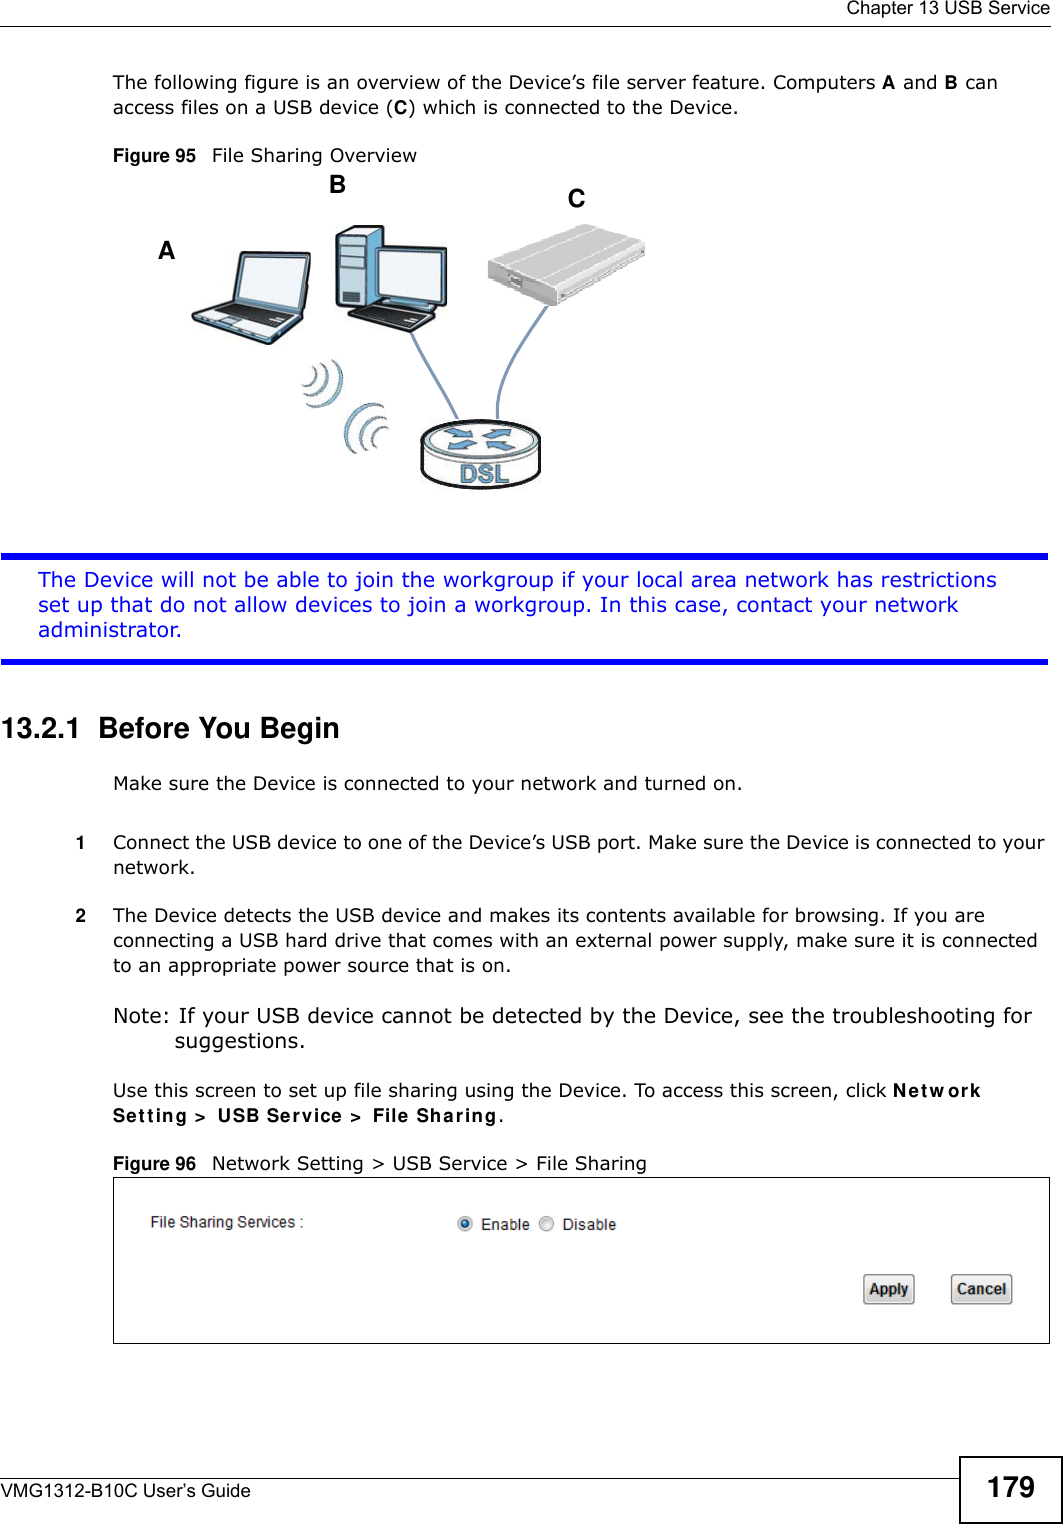  Chapter 13 USB ServiceVMG1312-B10C User’s Guide 179The following figure is an overview of the Device’s file server feature. Computers A and B can access files on a USB device (C) which is connected to the Device.Figure 95   File Sharing OverviewThe Device will not be able to join the workgroup if your local area network has restrictions set up that do not allow devices to join a workgroup. In this case, contact your network administrator.13.2.1  Before You BeginMake sure the Device is connected to your network and turned on.1Connect the USB device to one of the Device’s USB port. Make sure the Device is connected to your network.2The Device detects the USB device and makes its contents available for browsing. If you are connecting a USB hard drive that comes with an external power supply, make sure it is connected to an appropriate power source that is on.Note: If your USB device cannot be detected by the Device, see the troubleshooting for suggestions. Use this screen to set up file sharing using the Device. To access this screen, click Net w or k Set t ing &gt;  USB Se rvice &gt;  File  Shar ing.Figure 96   Network Setting &gt; USB Service &gt; File SharingABC